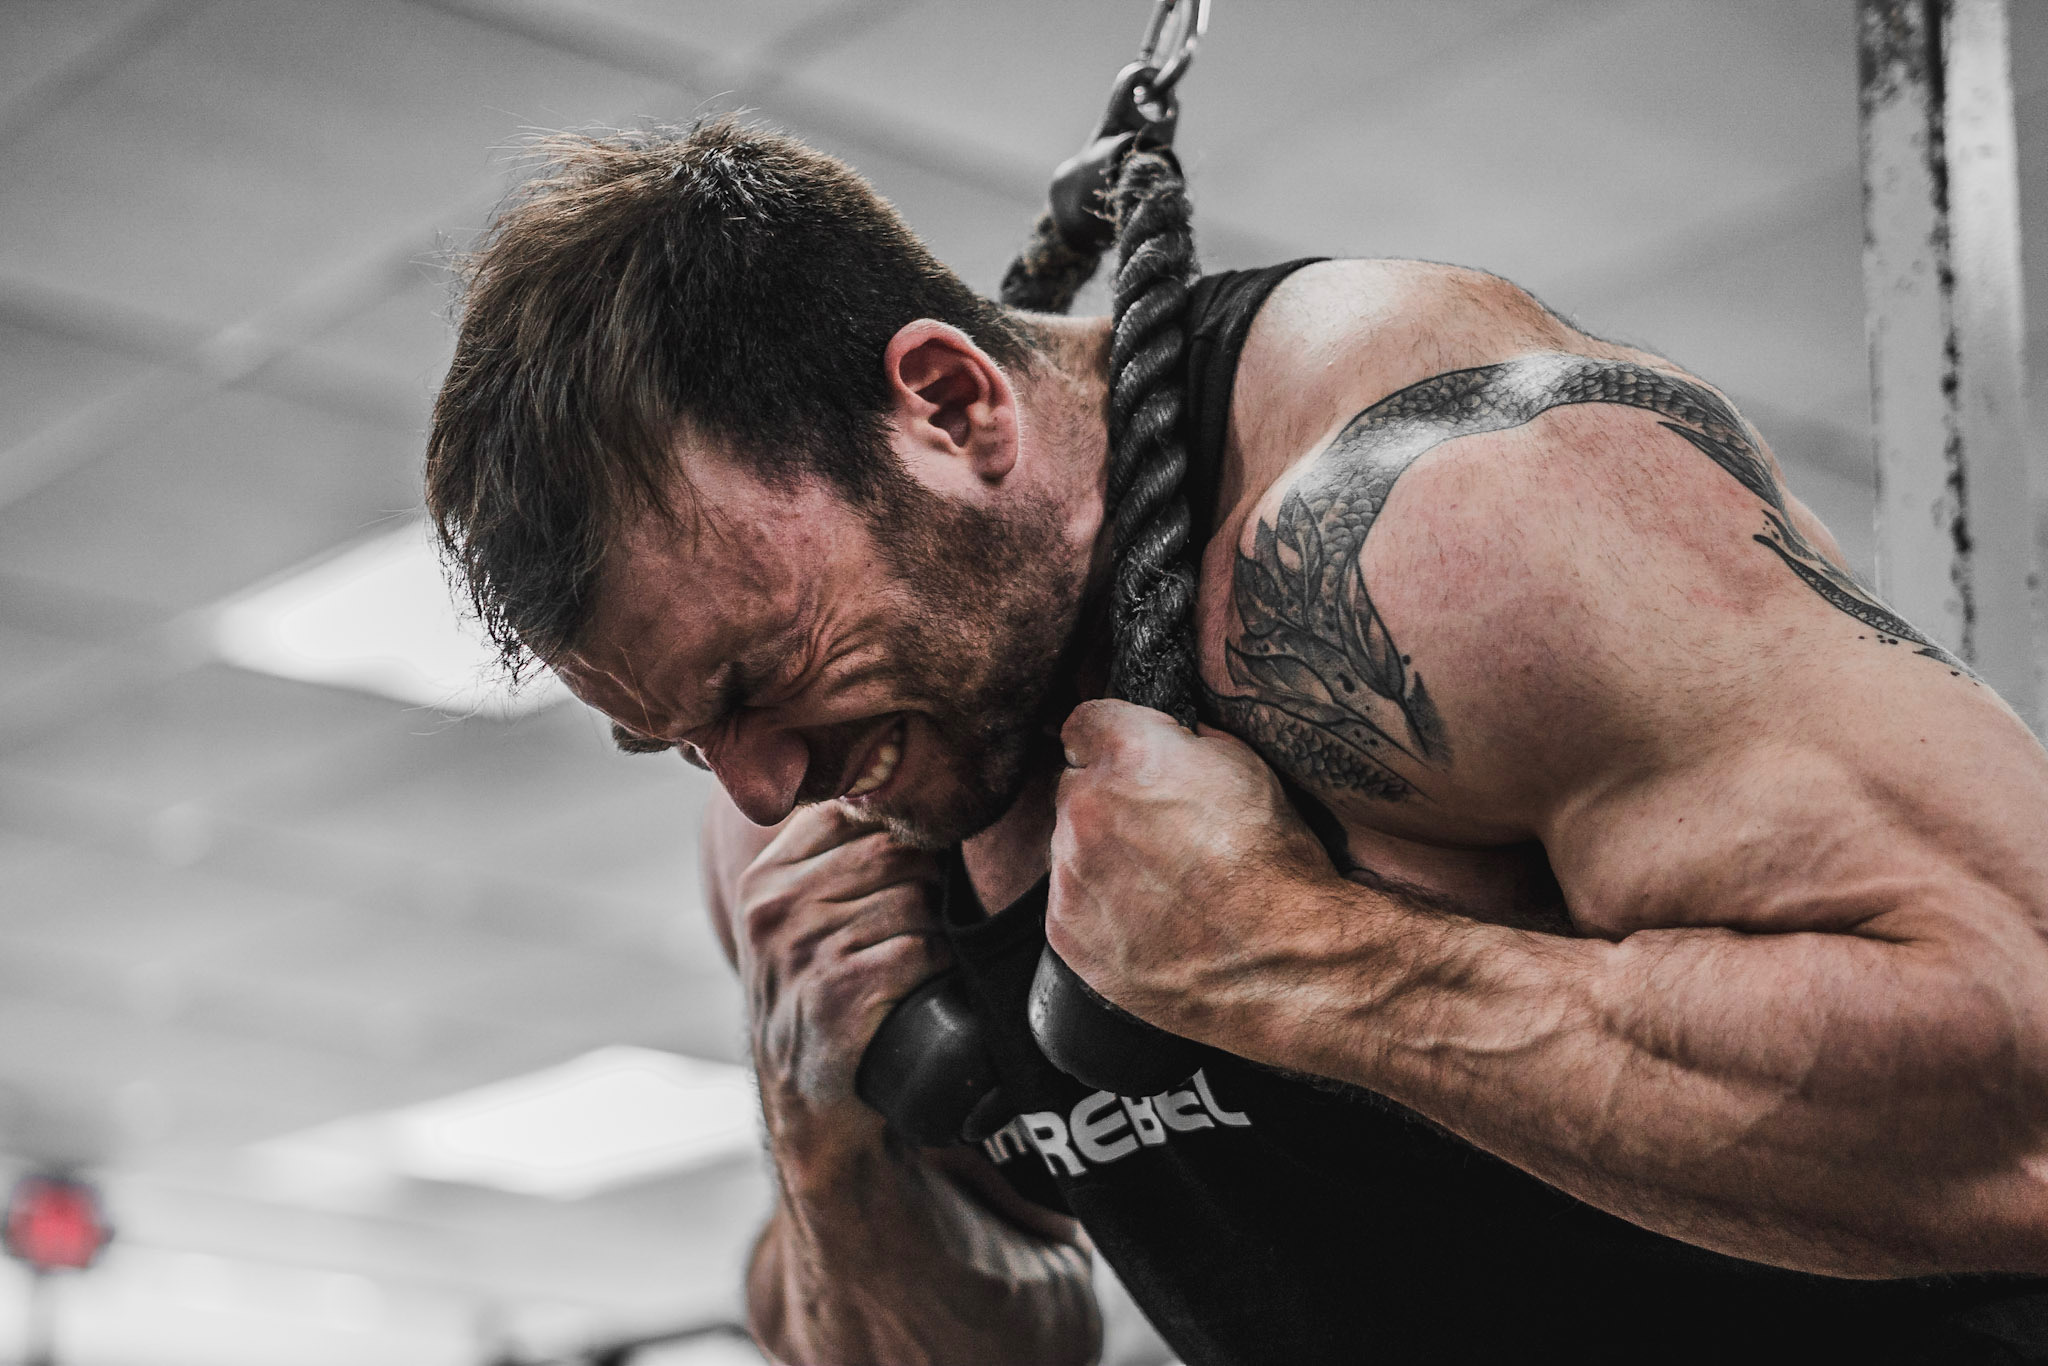 9 Signs You Might Be “That Guy” in the Gym